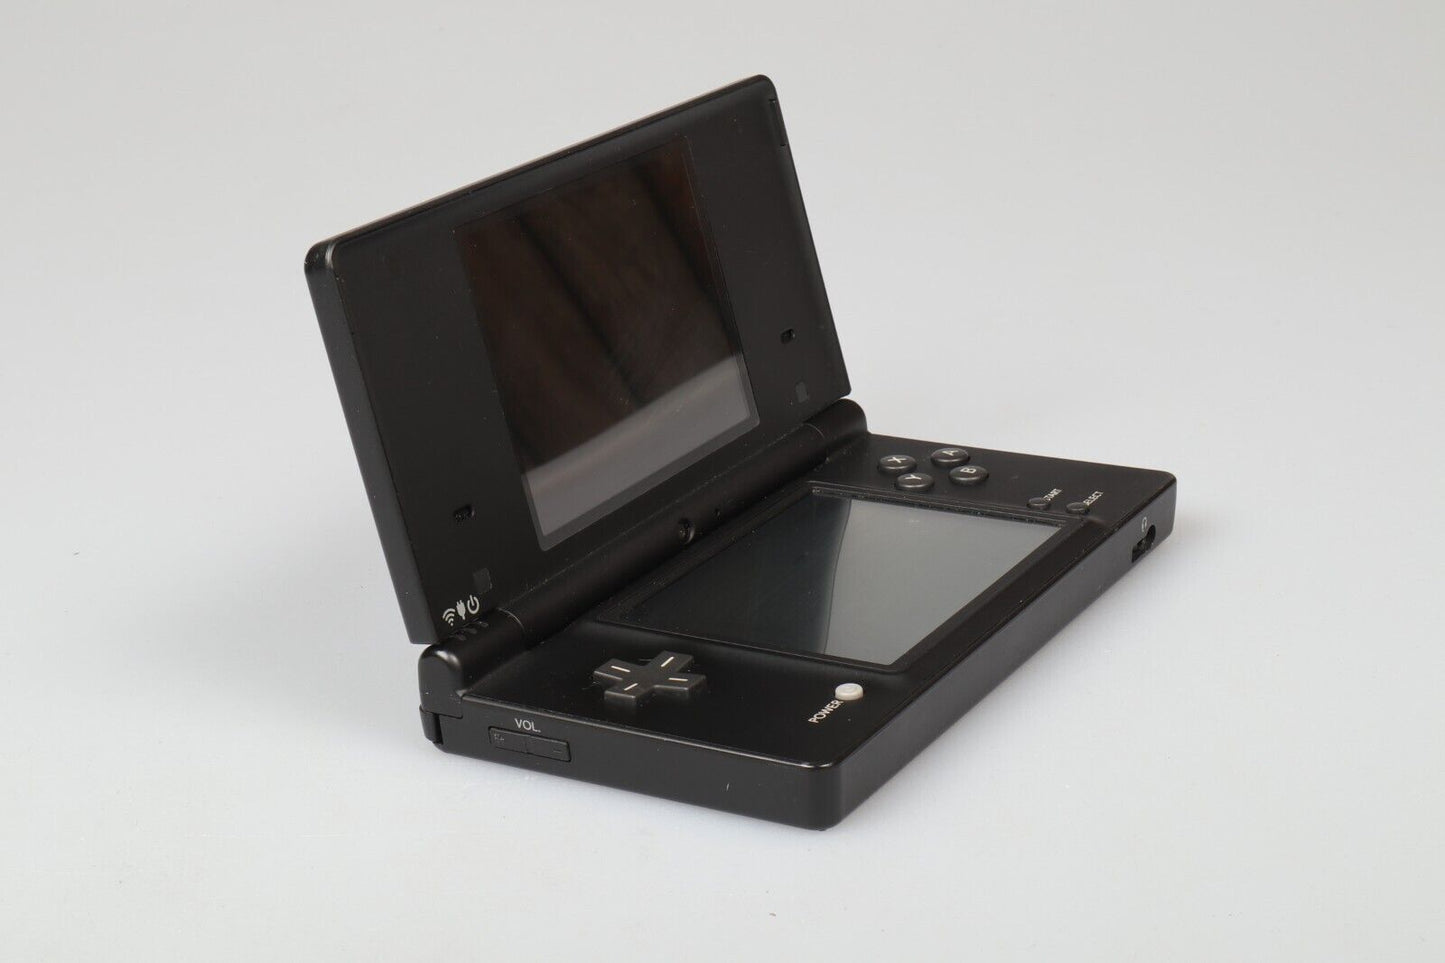 Nintendo DS | TWL-001 (EUR) | Boxed Black (NO CHARGER AND STYLUS)